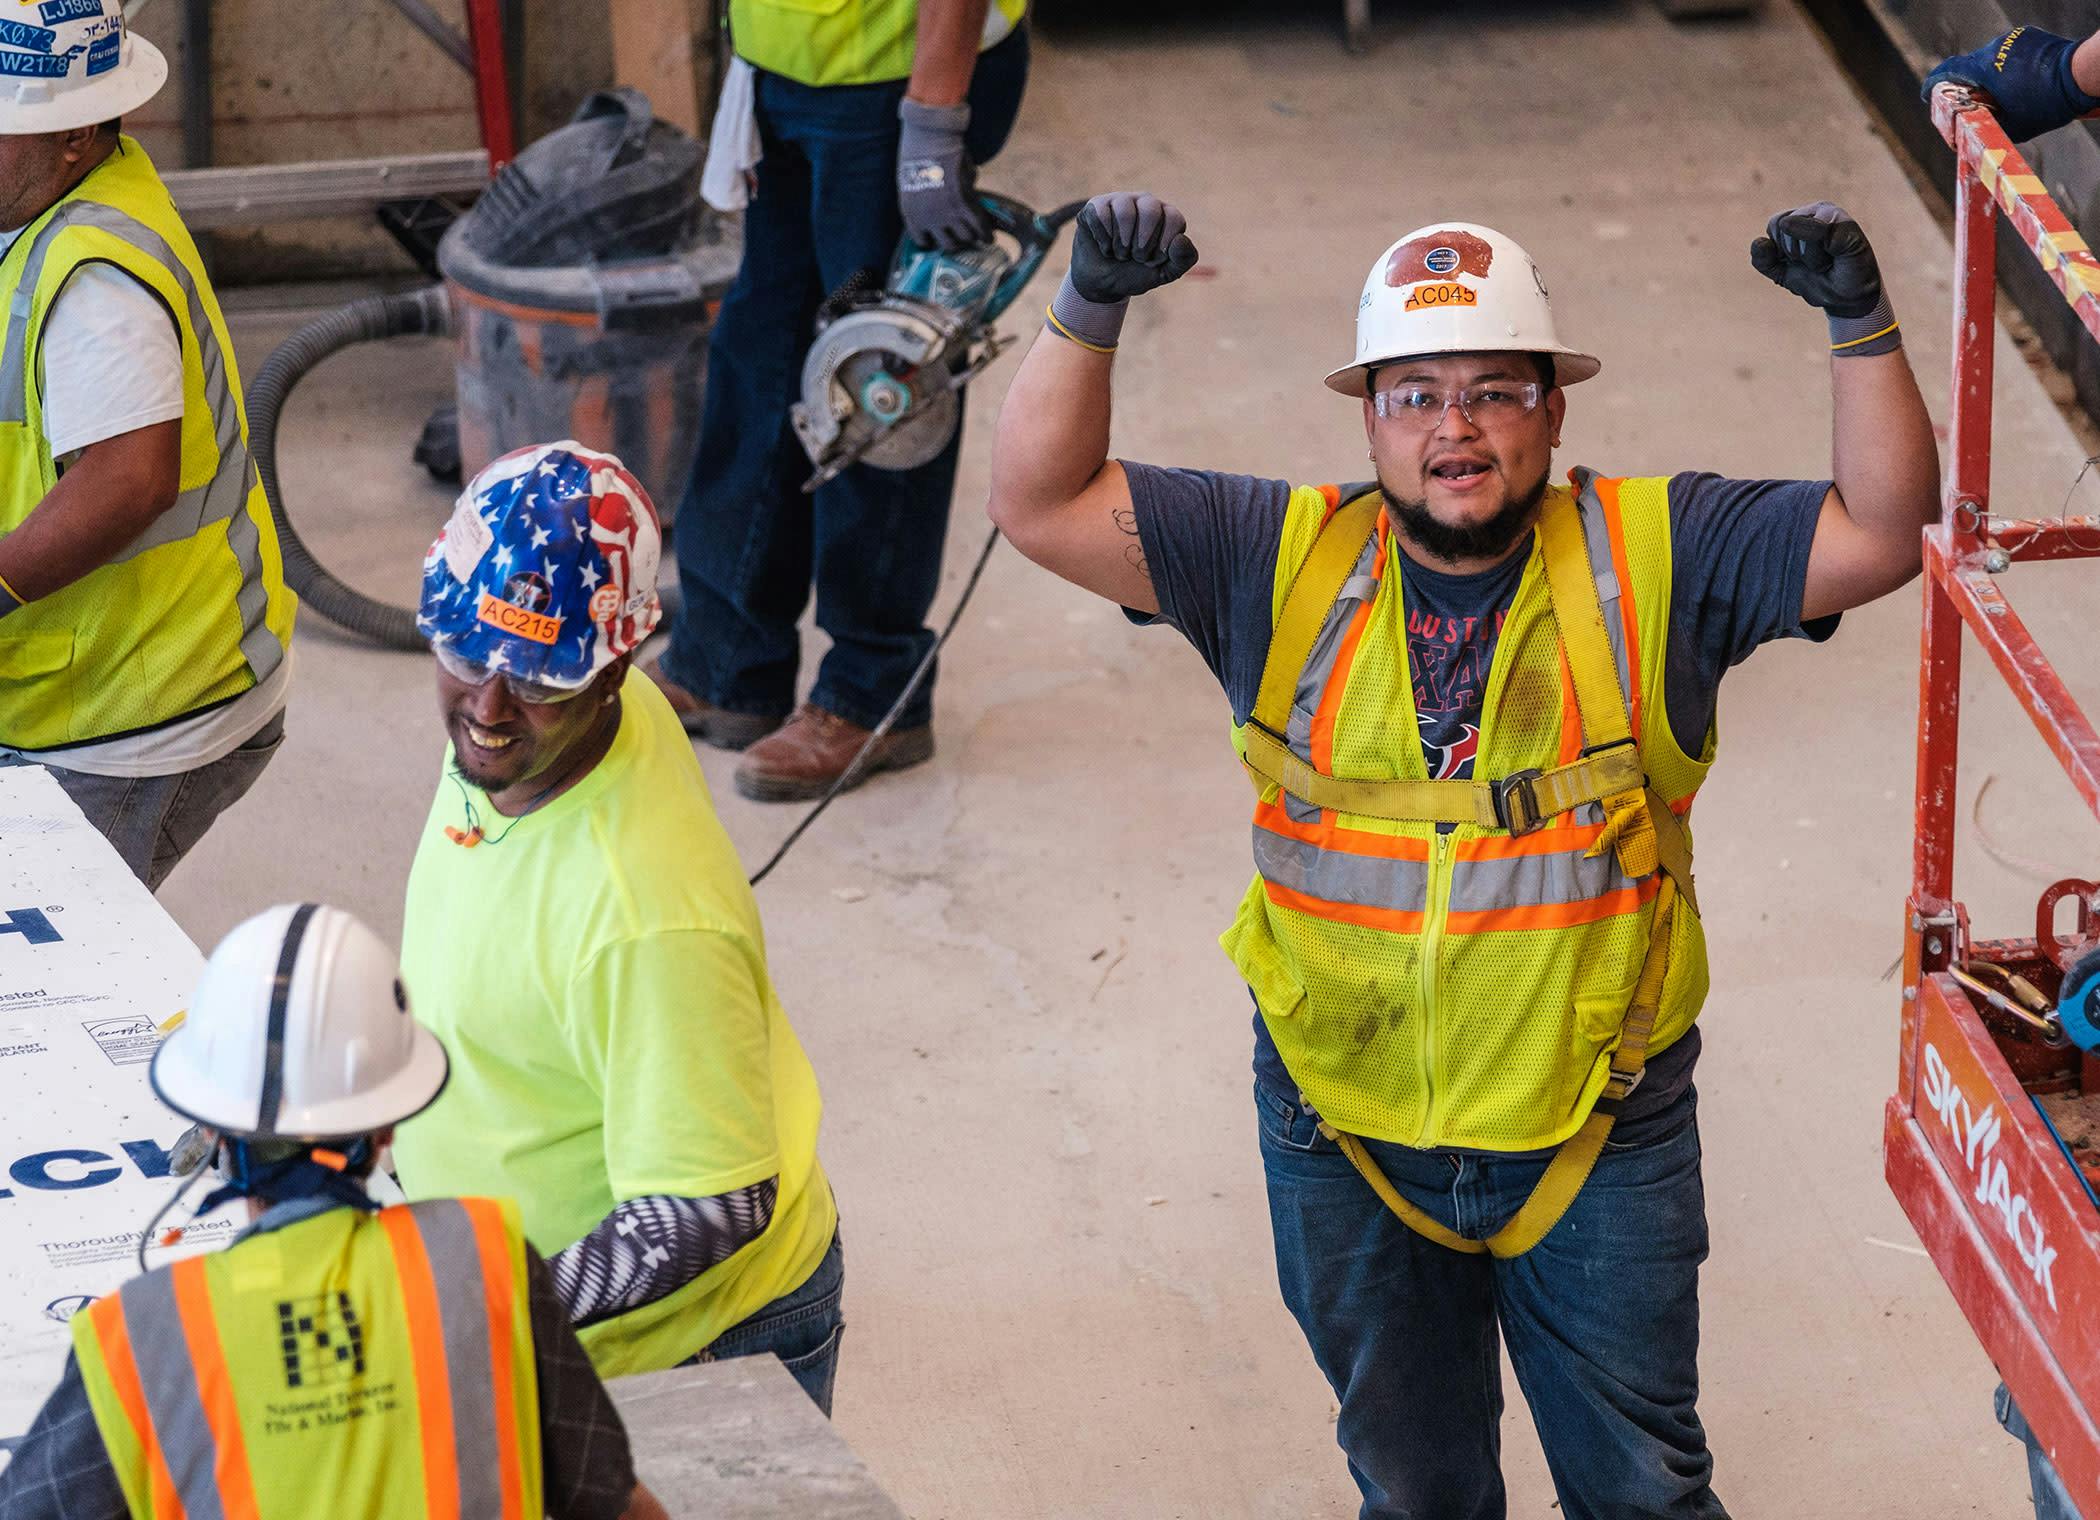 Construction workers celebrating